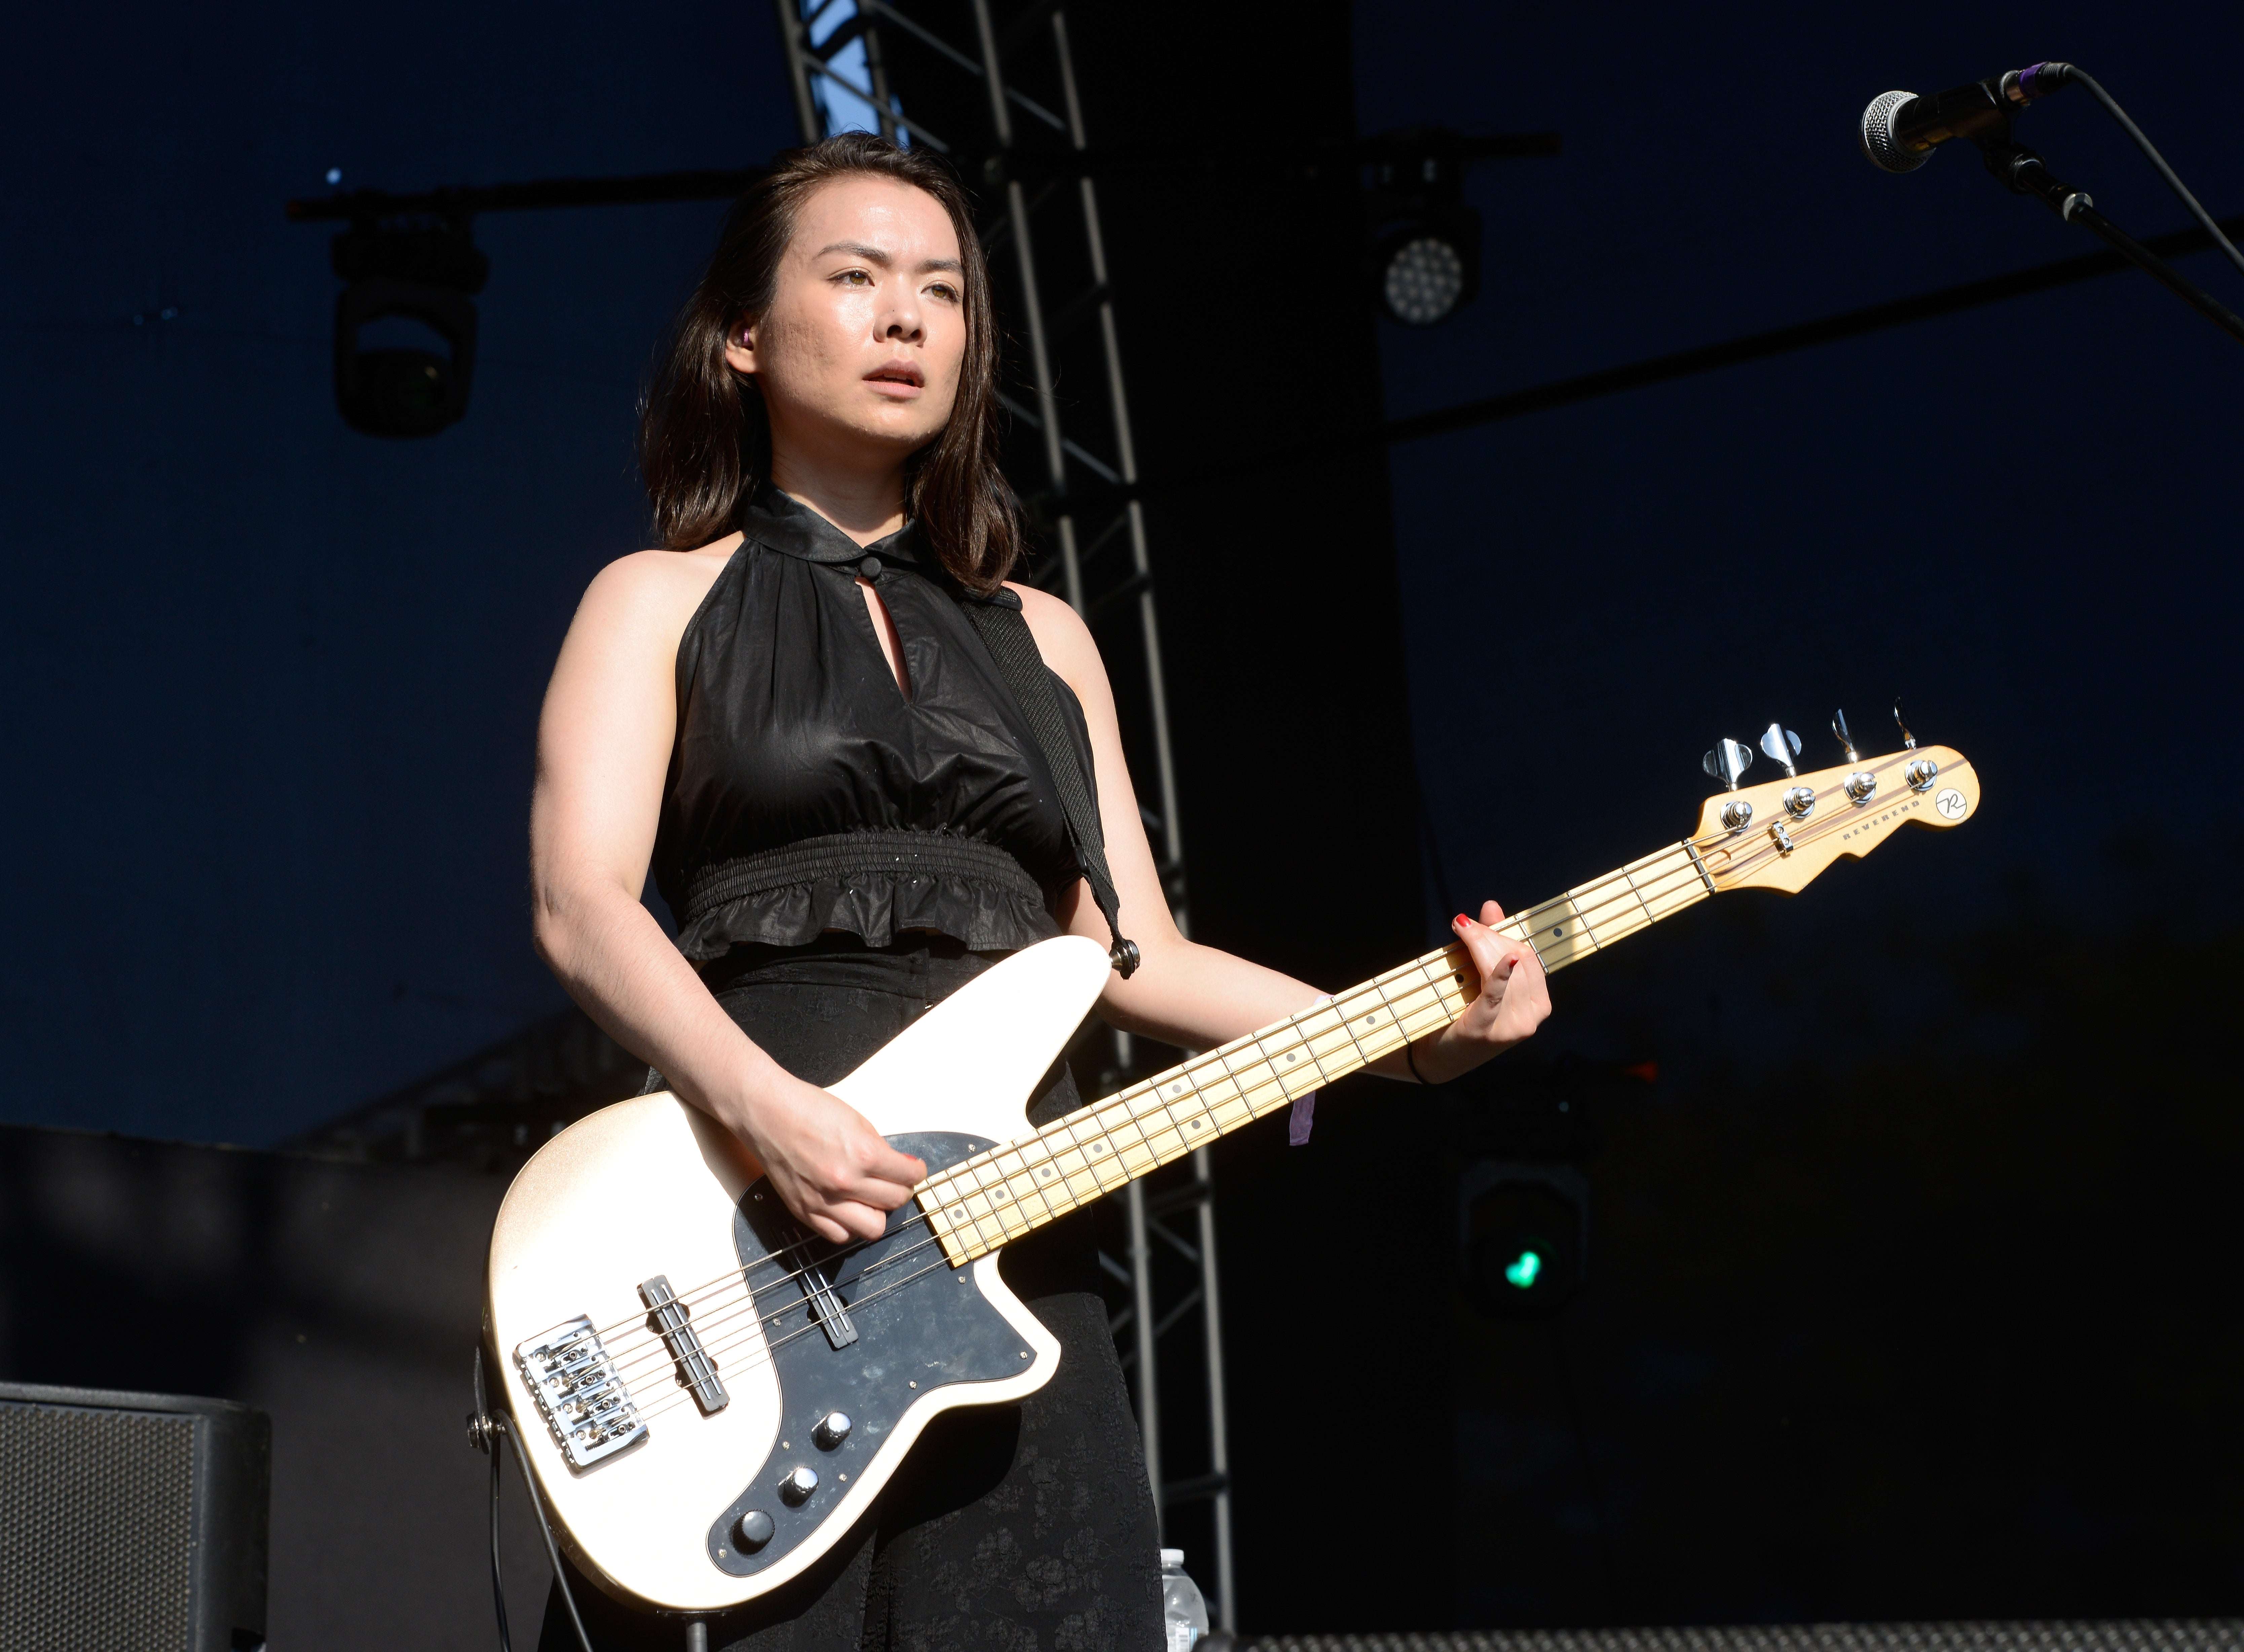 Mitski has asked fans to think about spending less time on their phones while at live shows